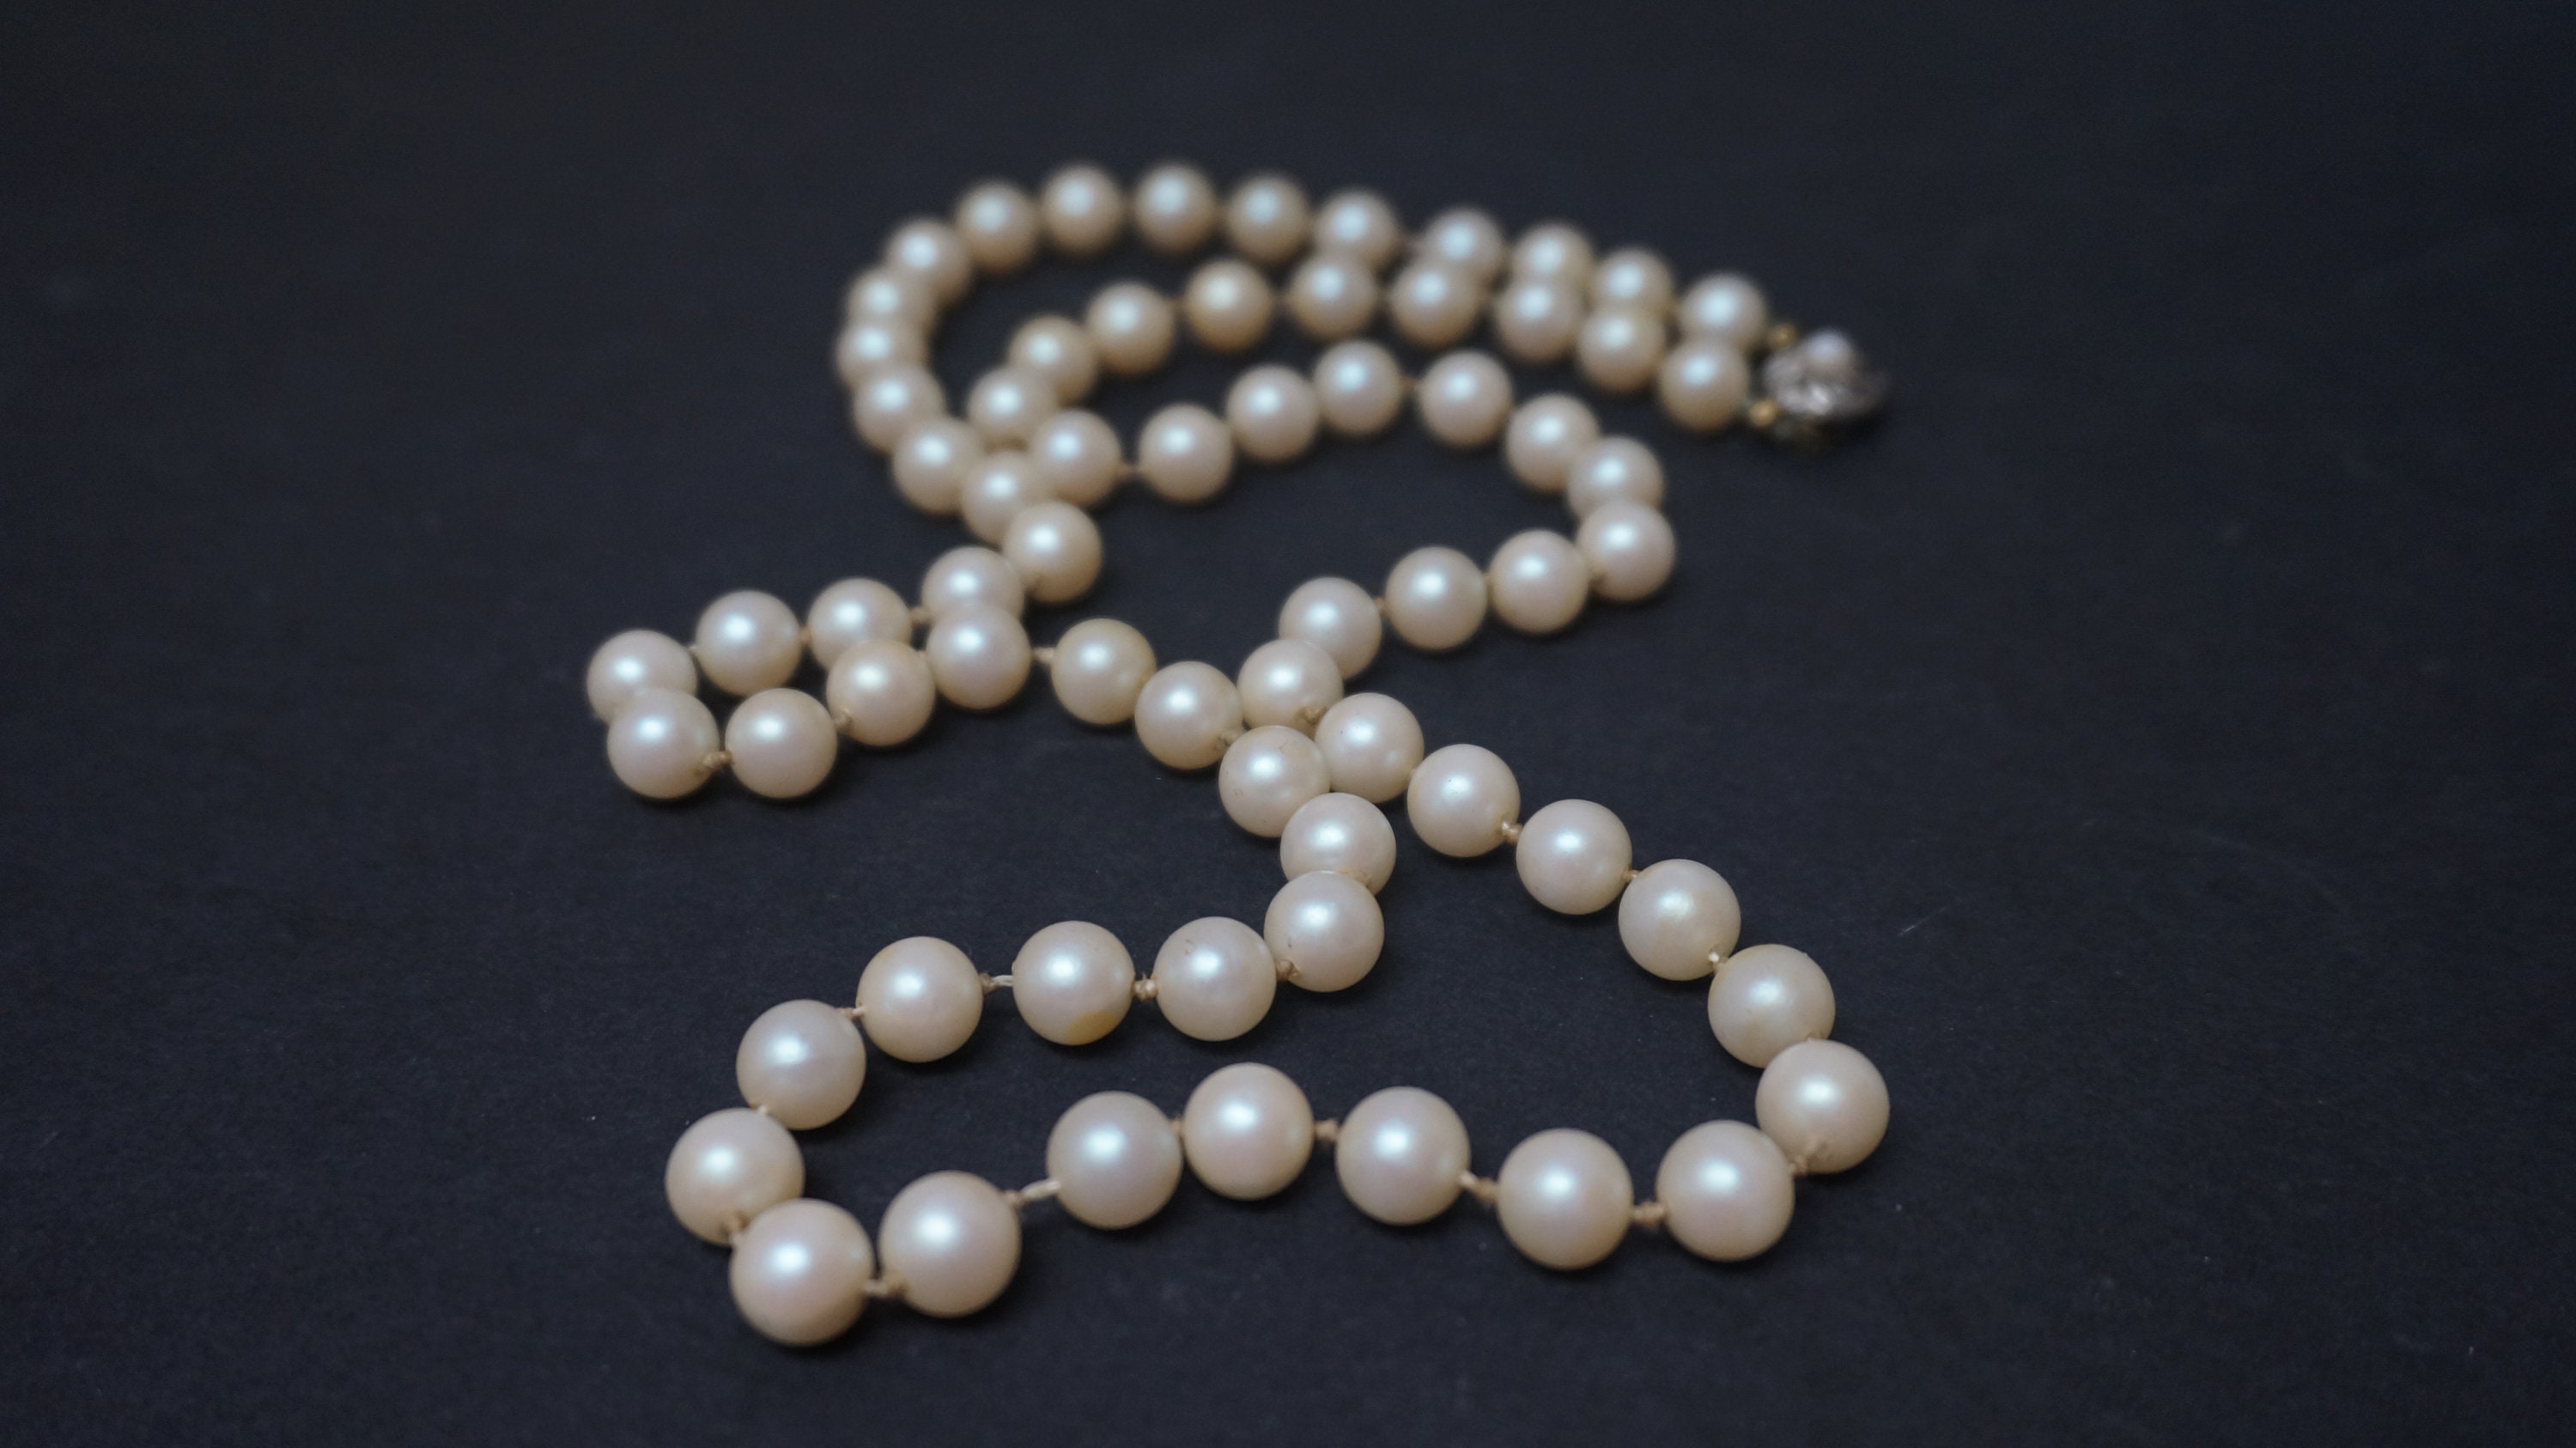 Vintage Faux Pearl Necklace With Sterling Clasp, Ivory Pearls